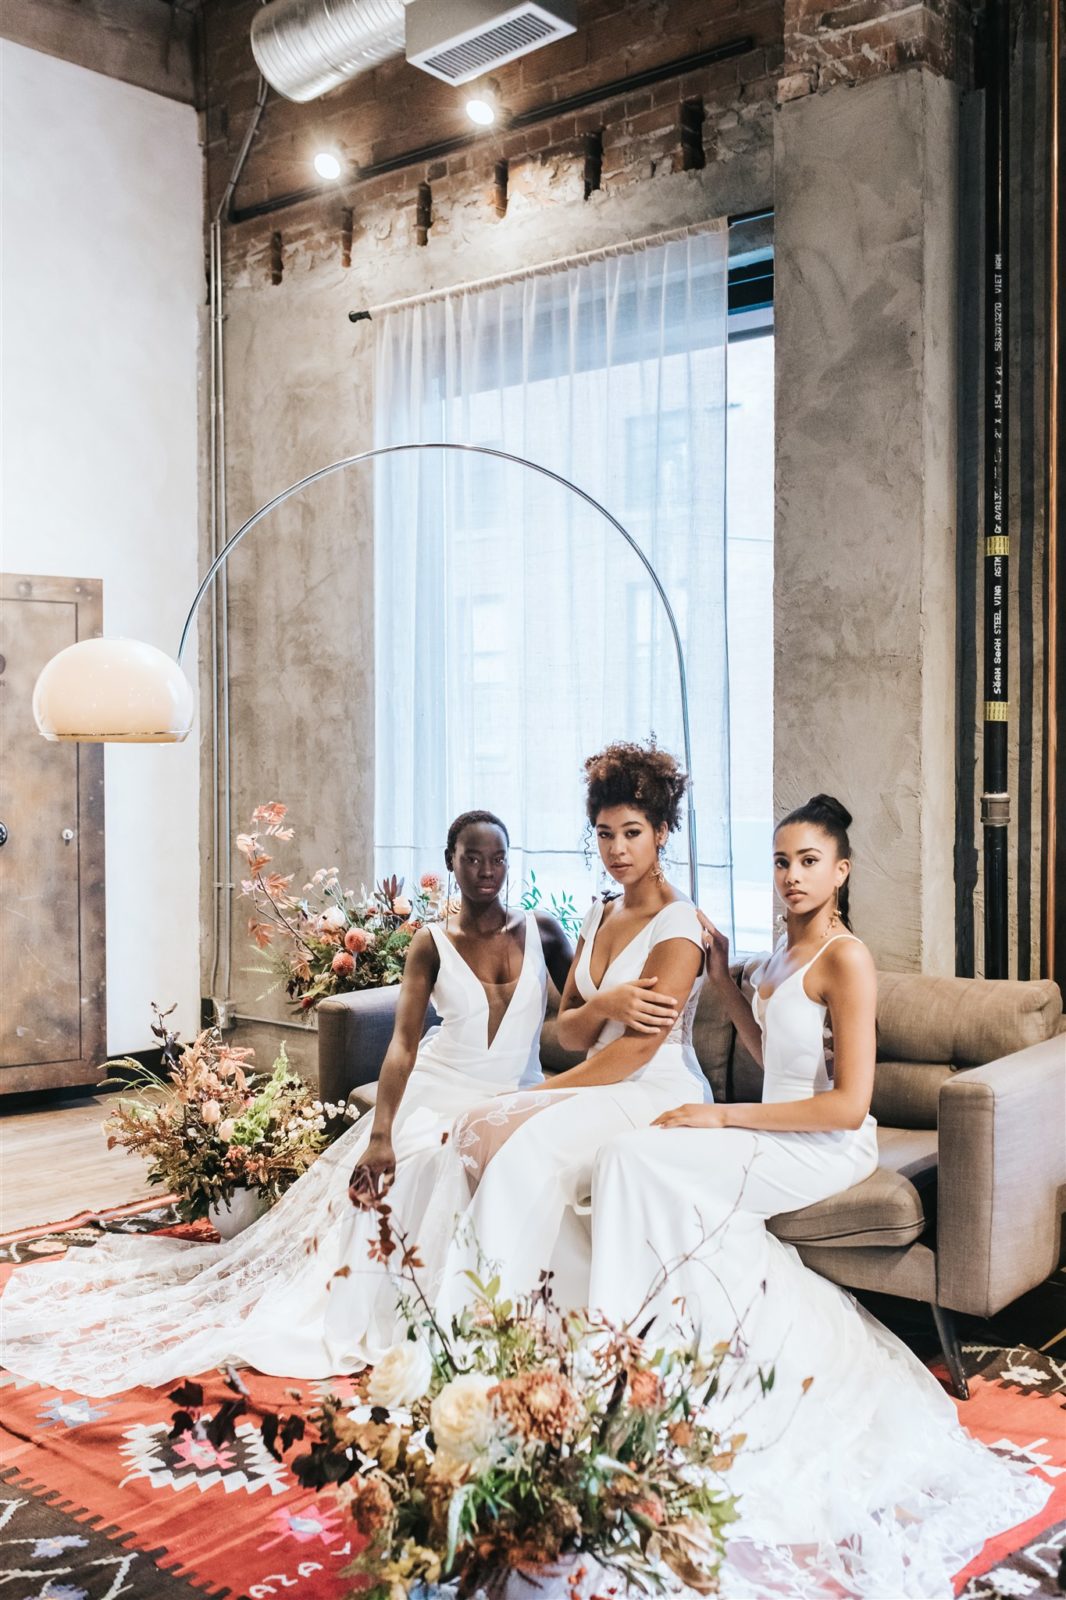 Chic and sexy bridal inspiration for a wild and organic wedding style